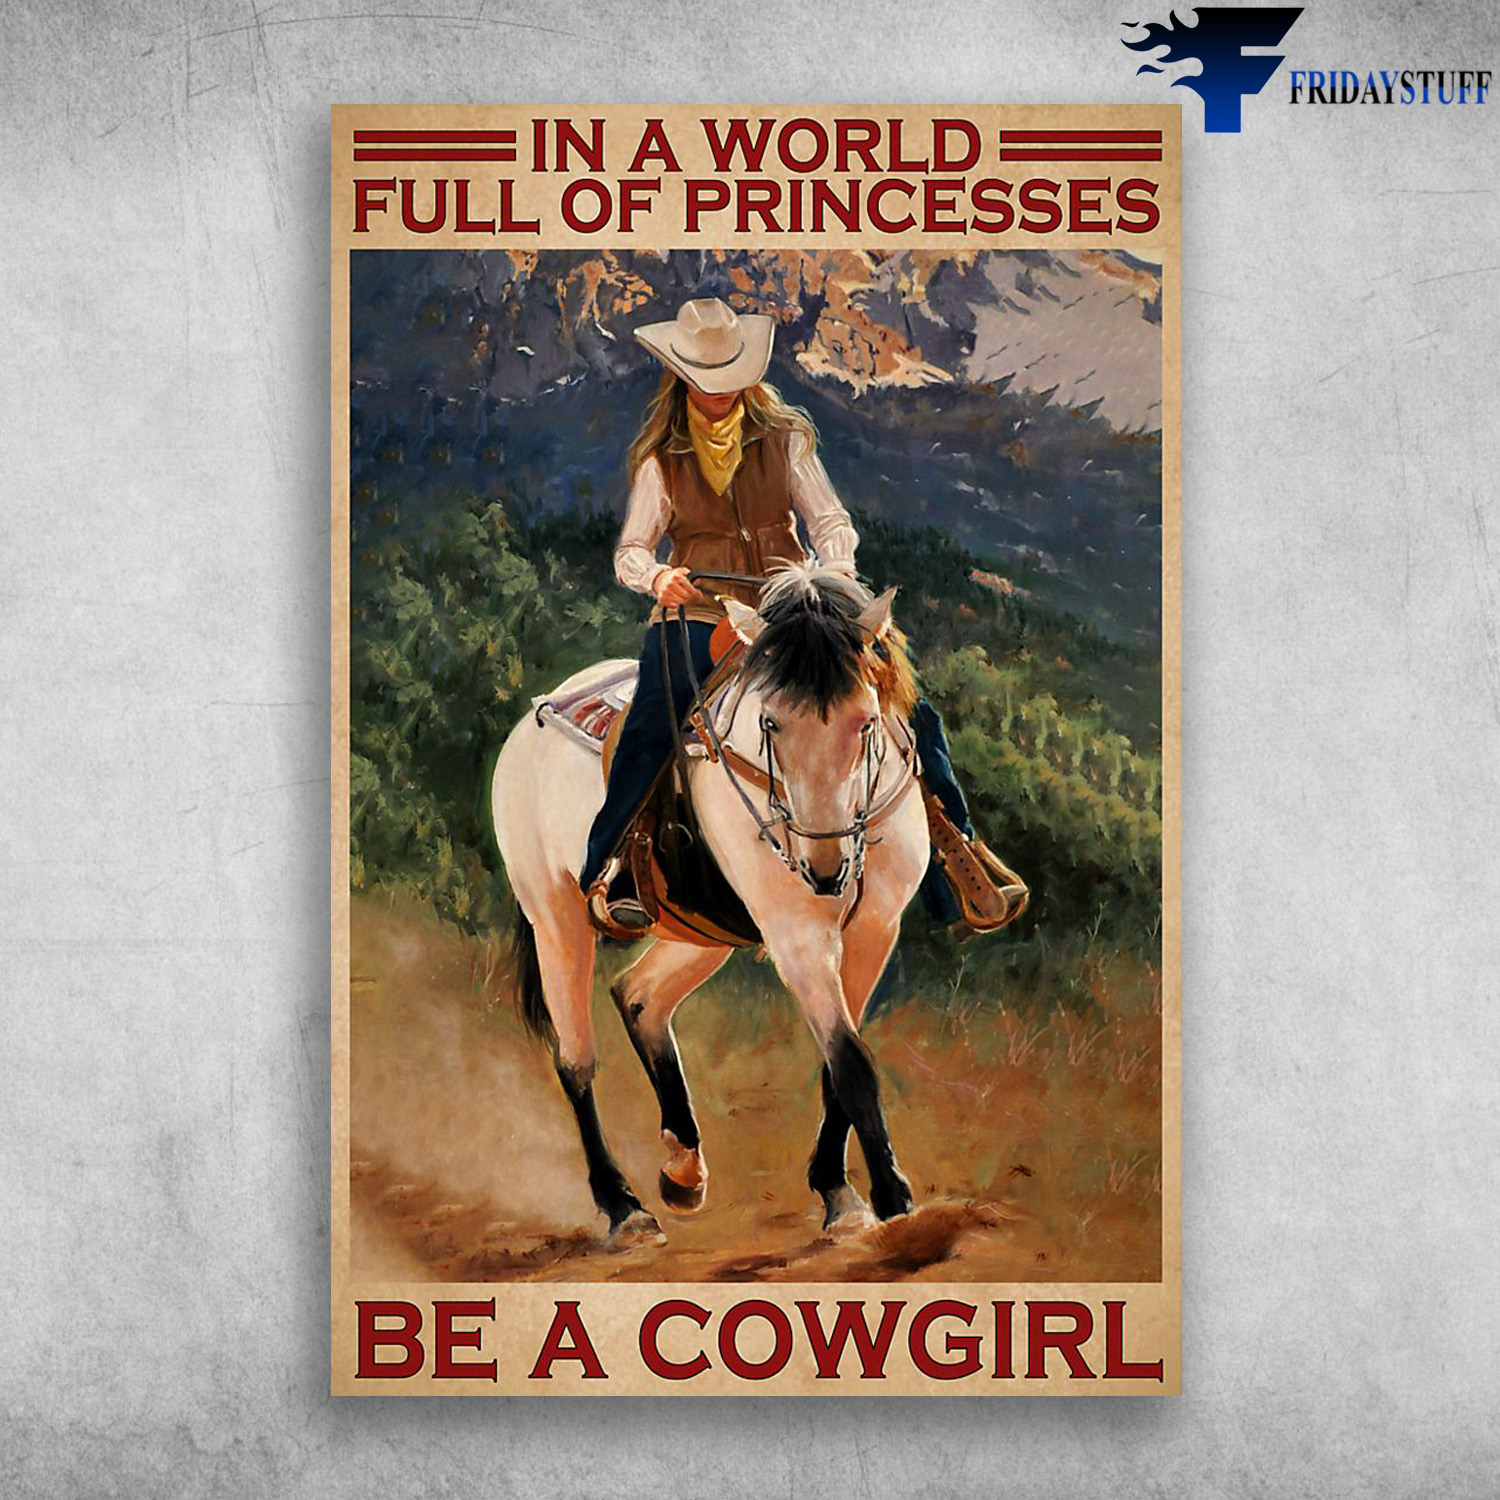 The Woman Is Riding A Horse - In A World Full Of Princesses Be A Cowgirl